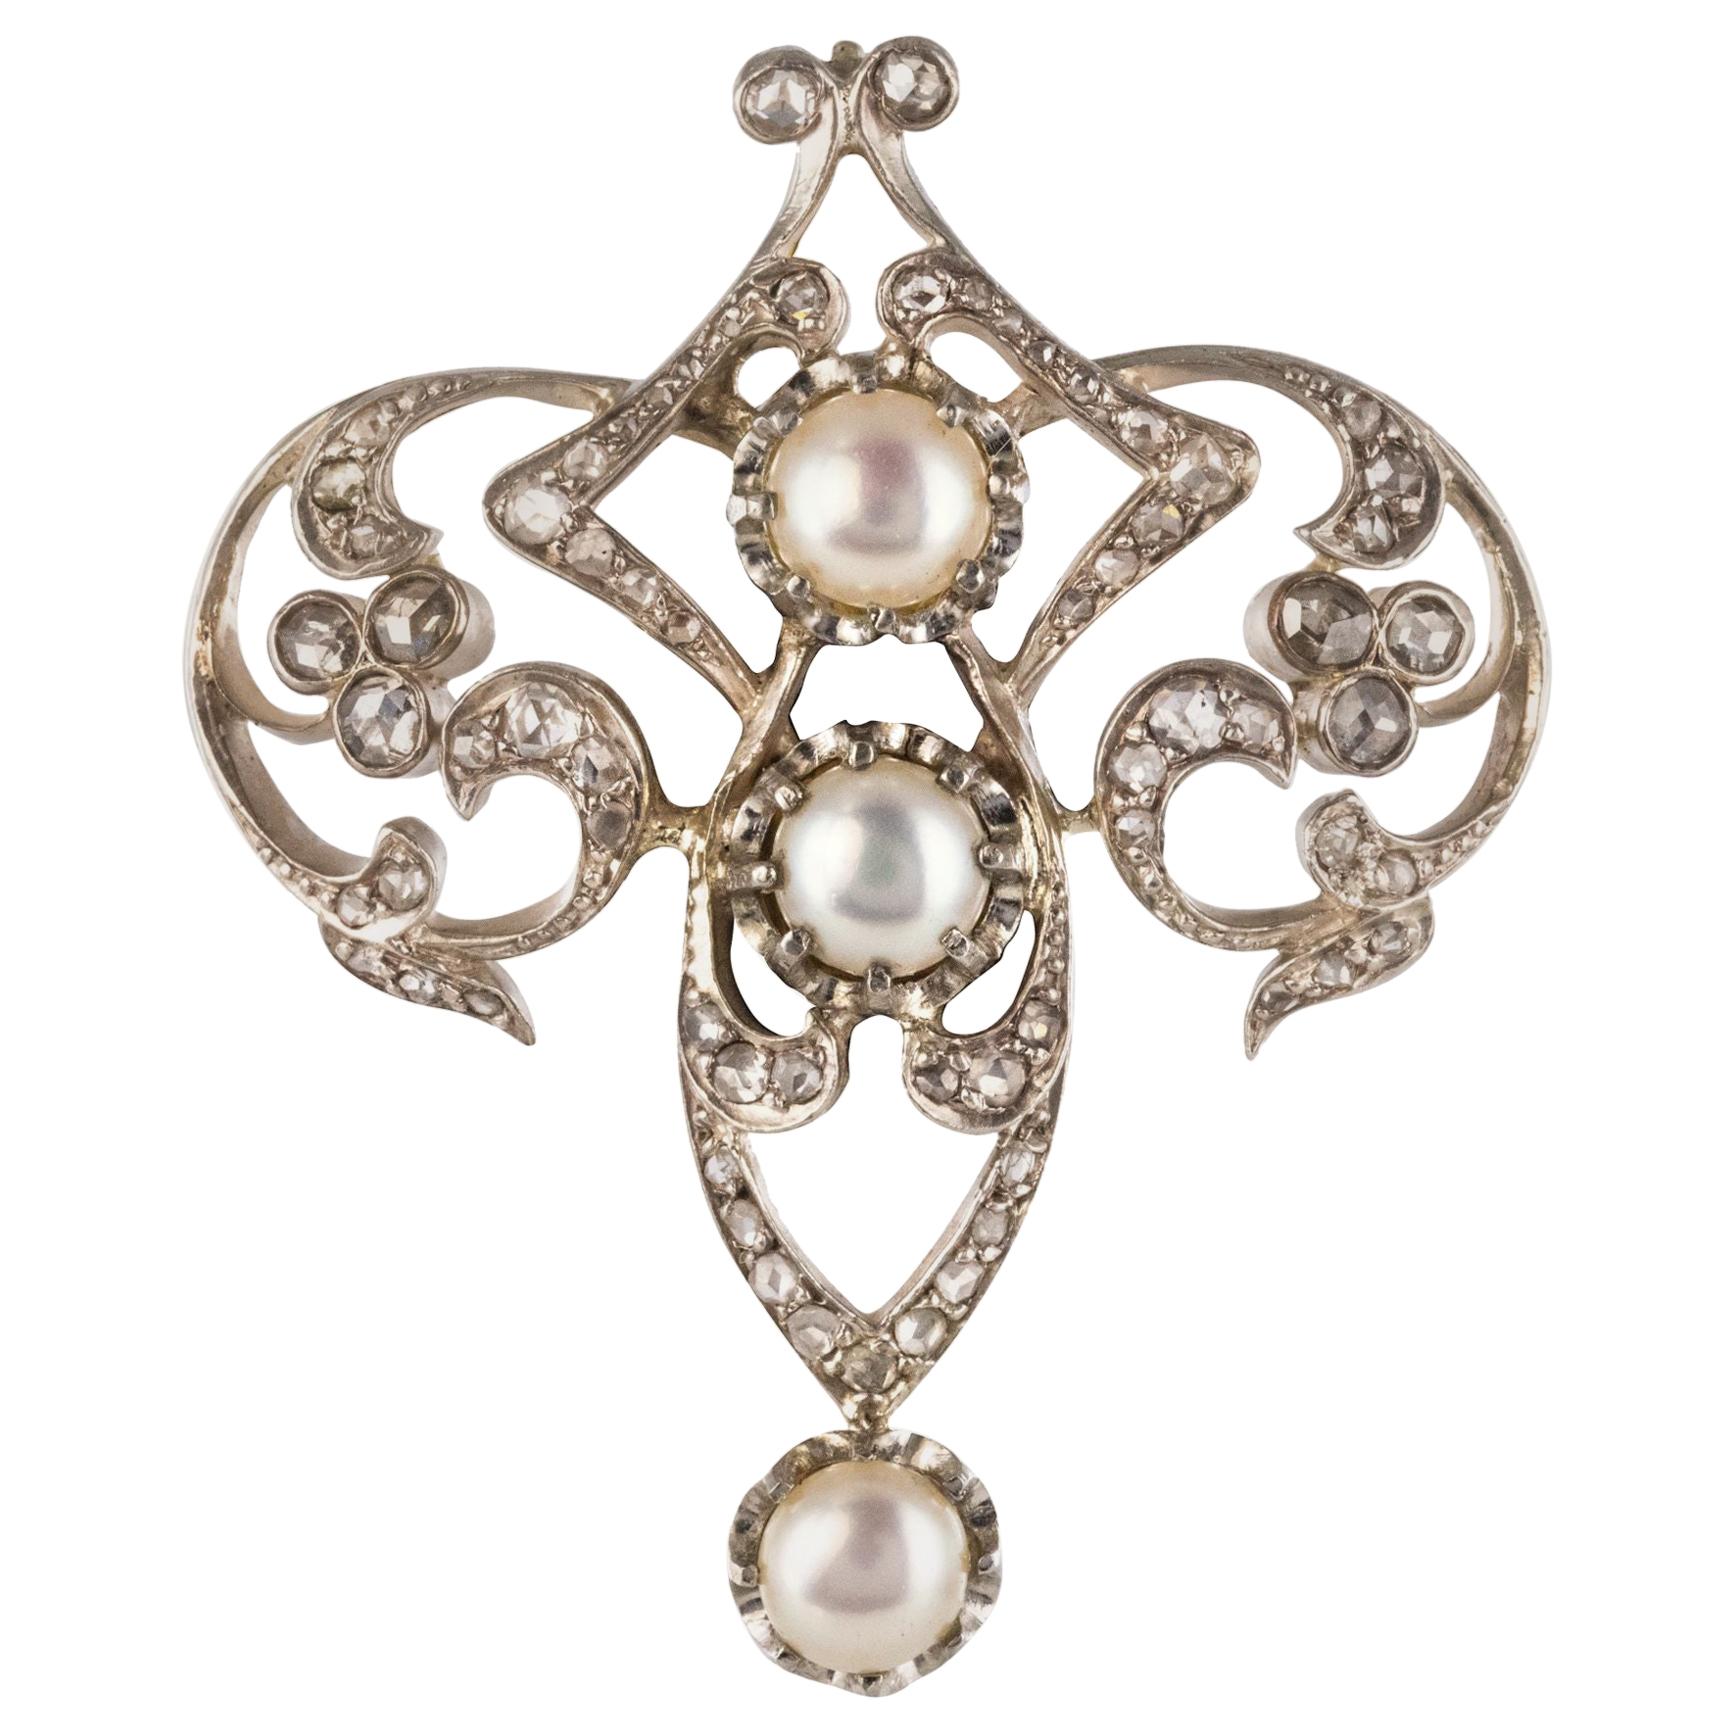 Antique Diamond and Pearl Brooch